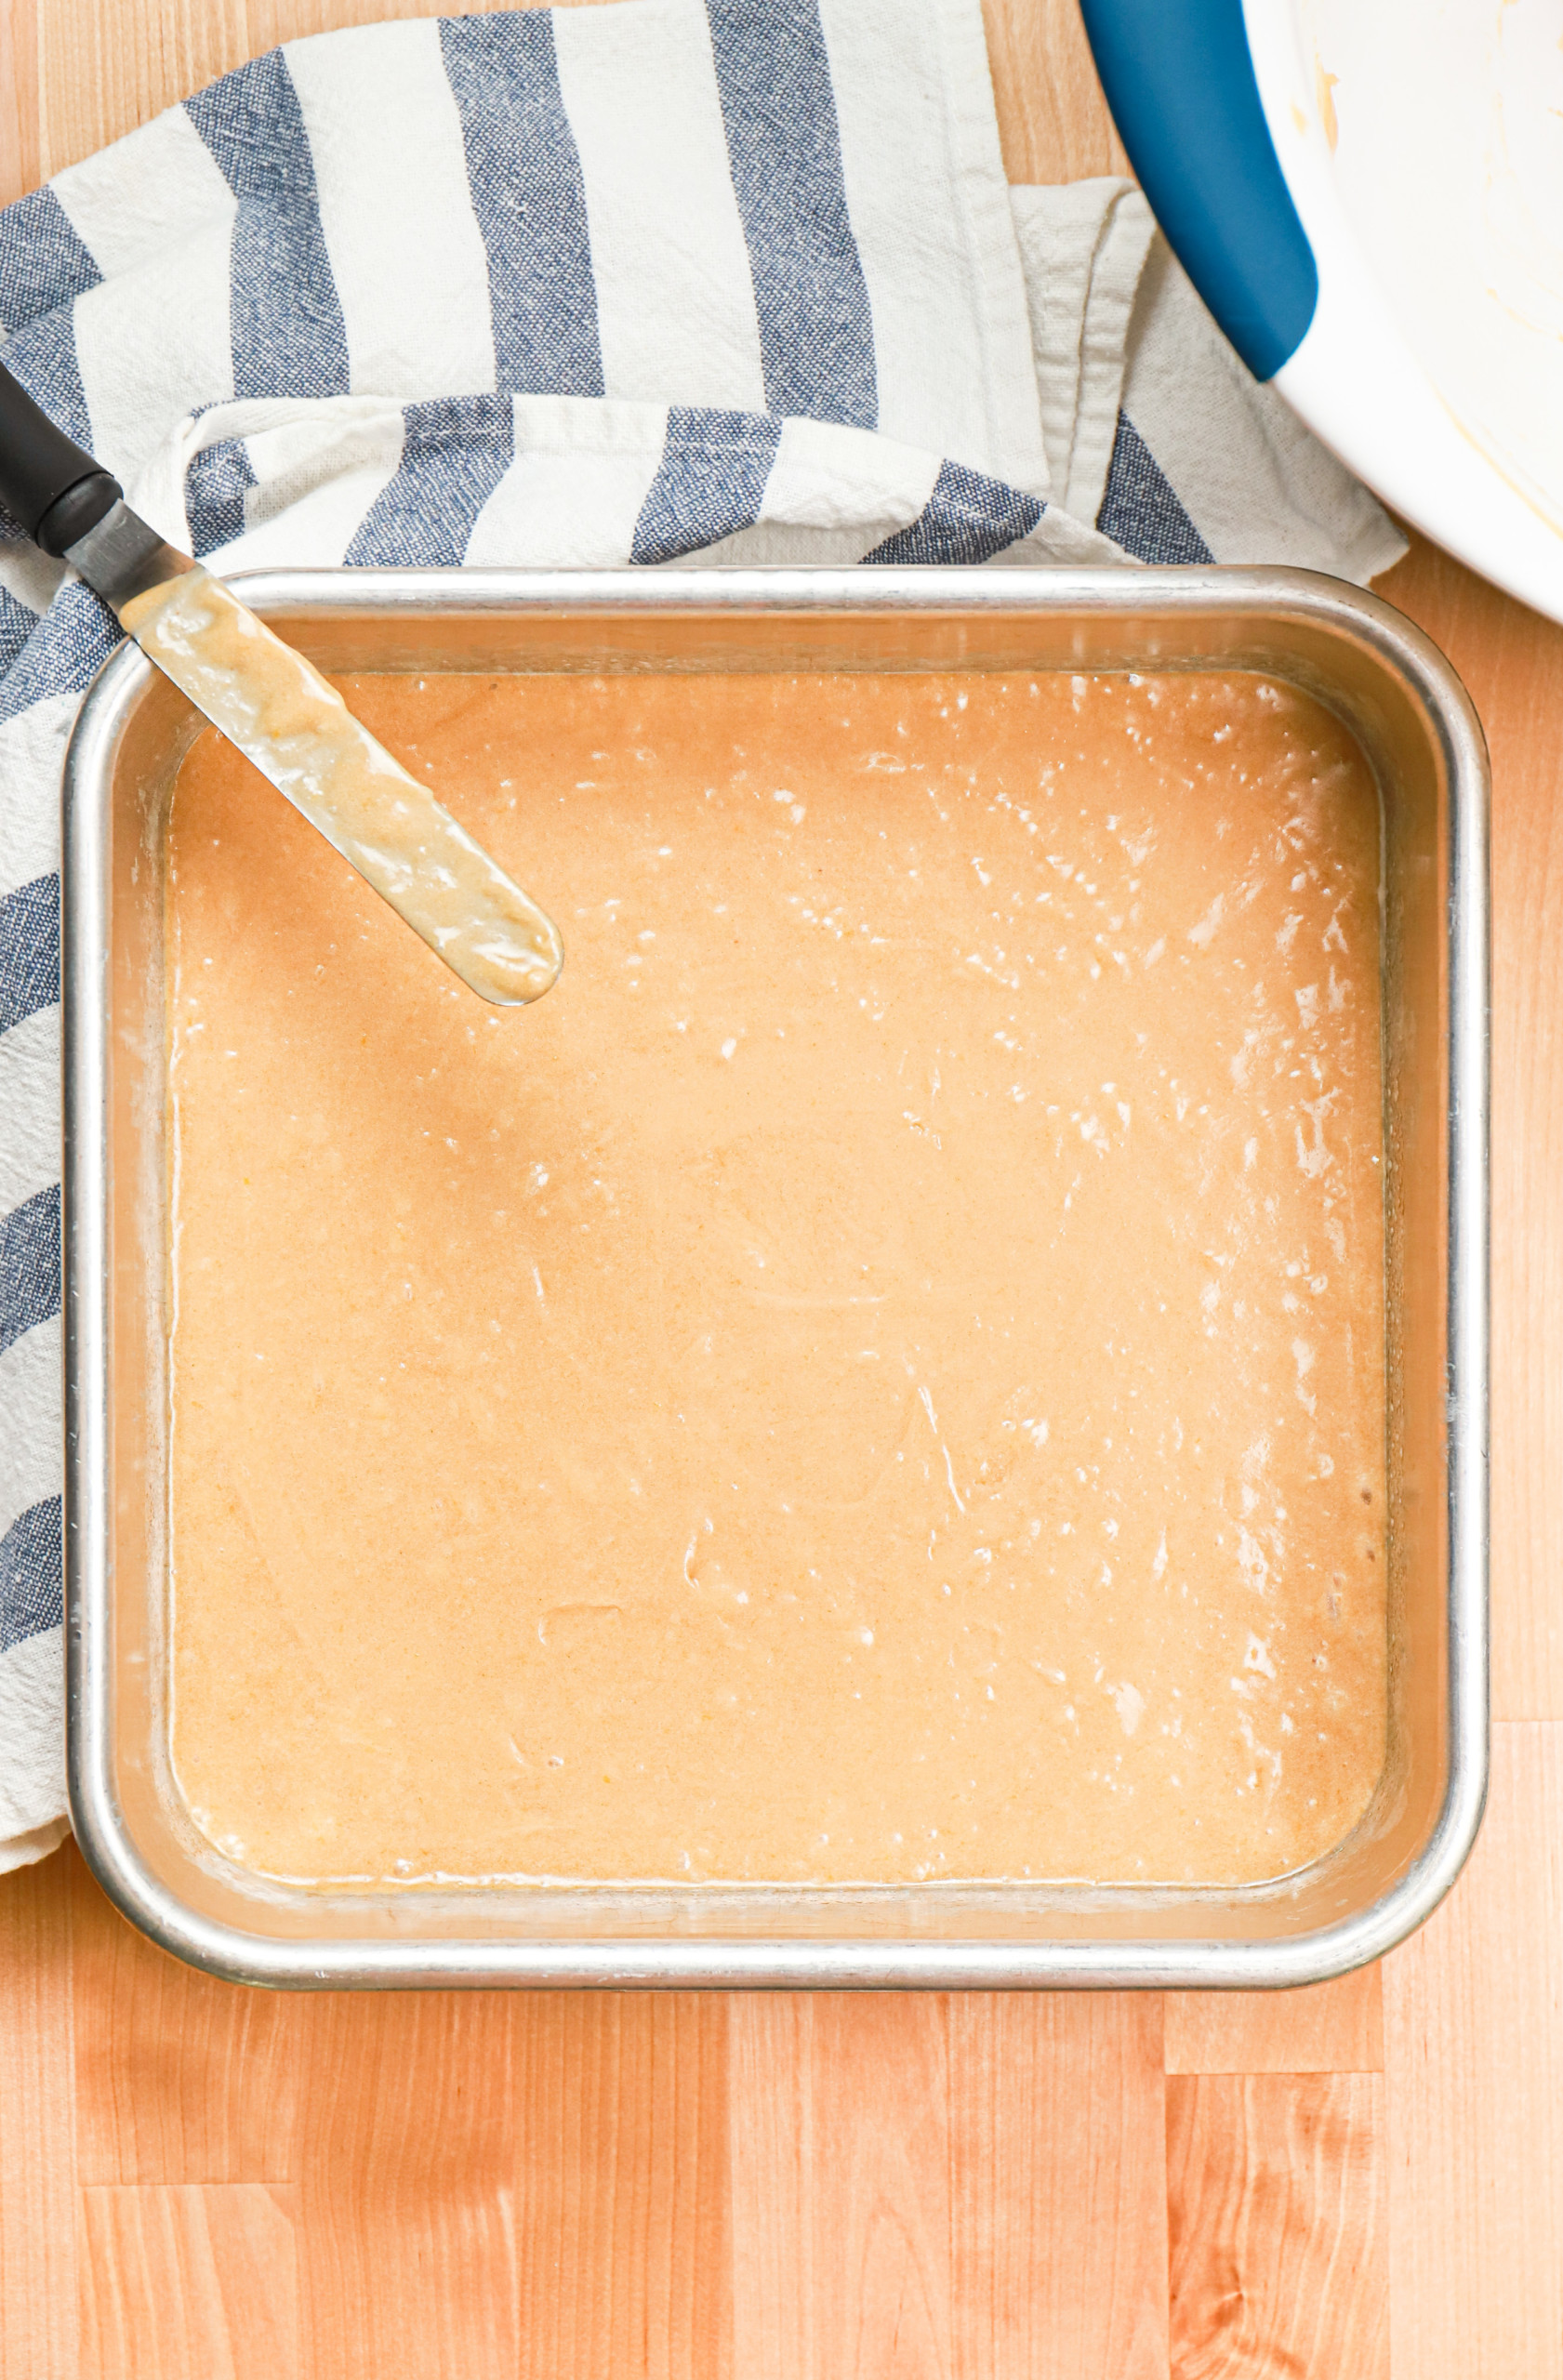 Overhead view of the maple blondie batter in an aluminum baking dish.